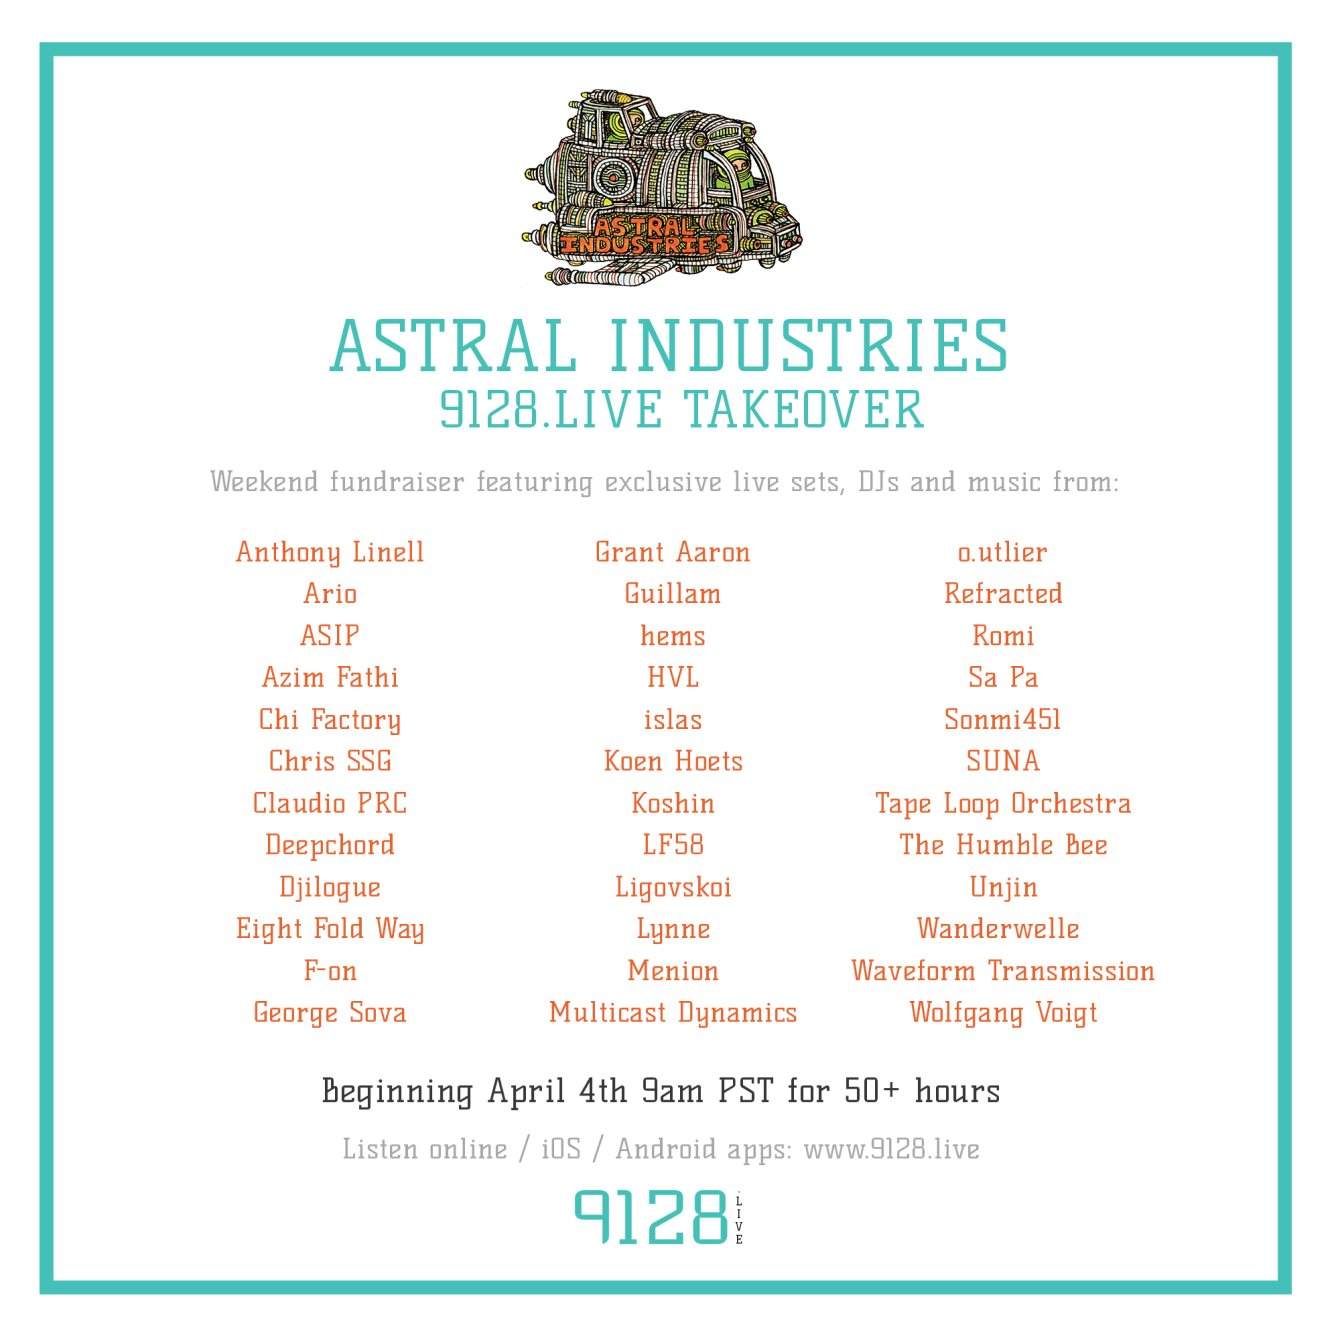 Astral Industries 9128.Live Weekend Takeover - フライヤー表